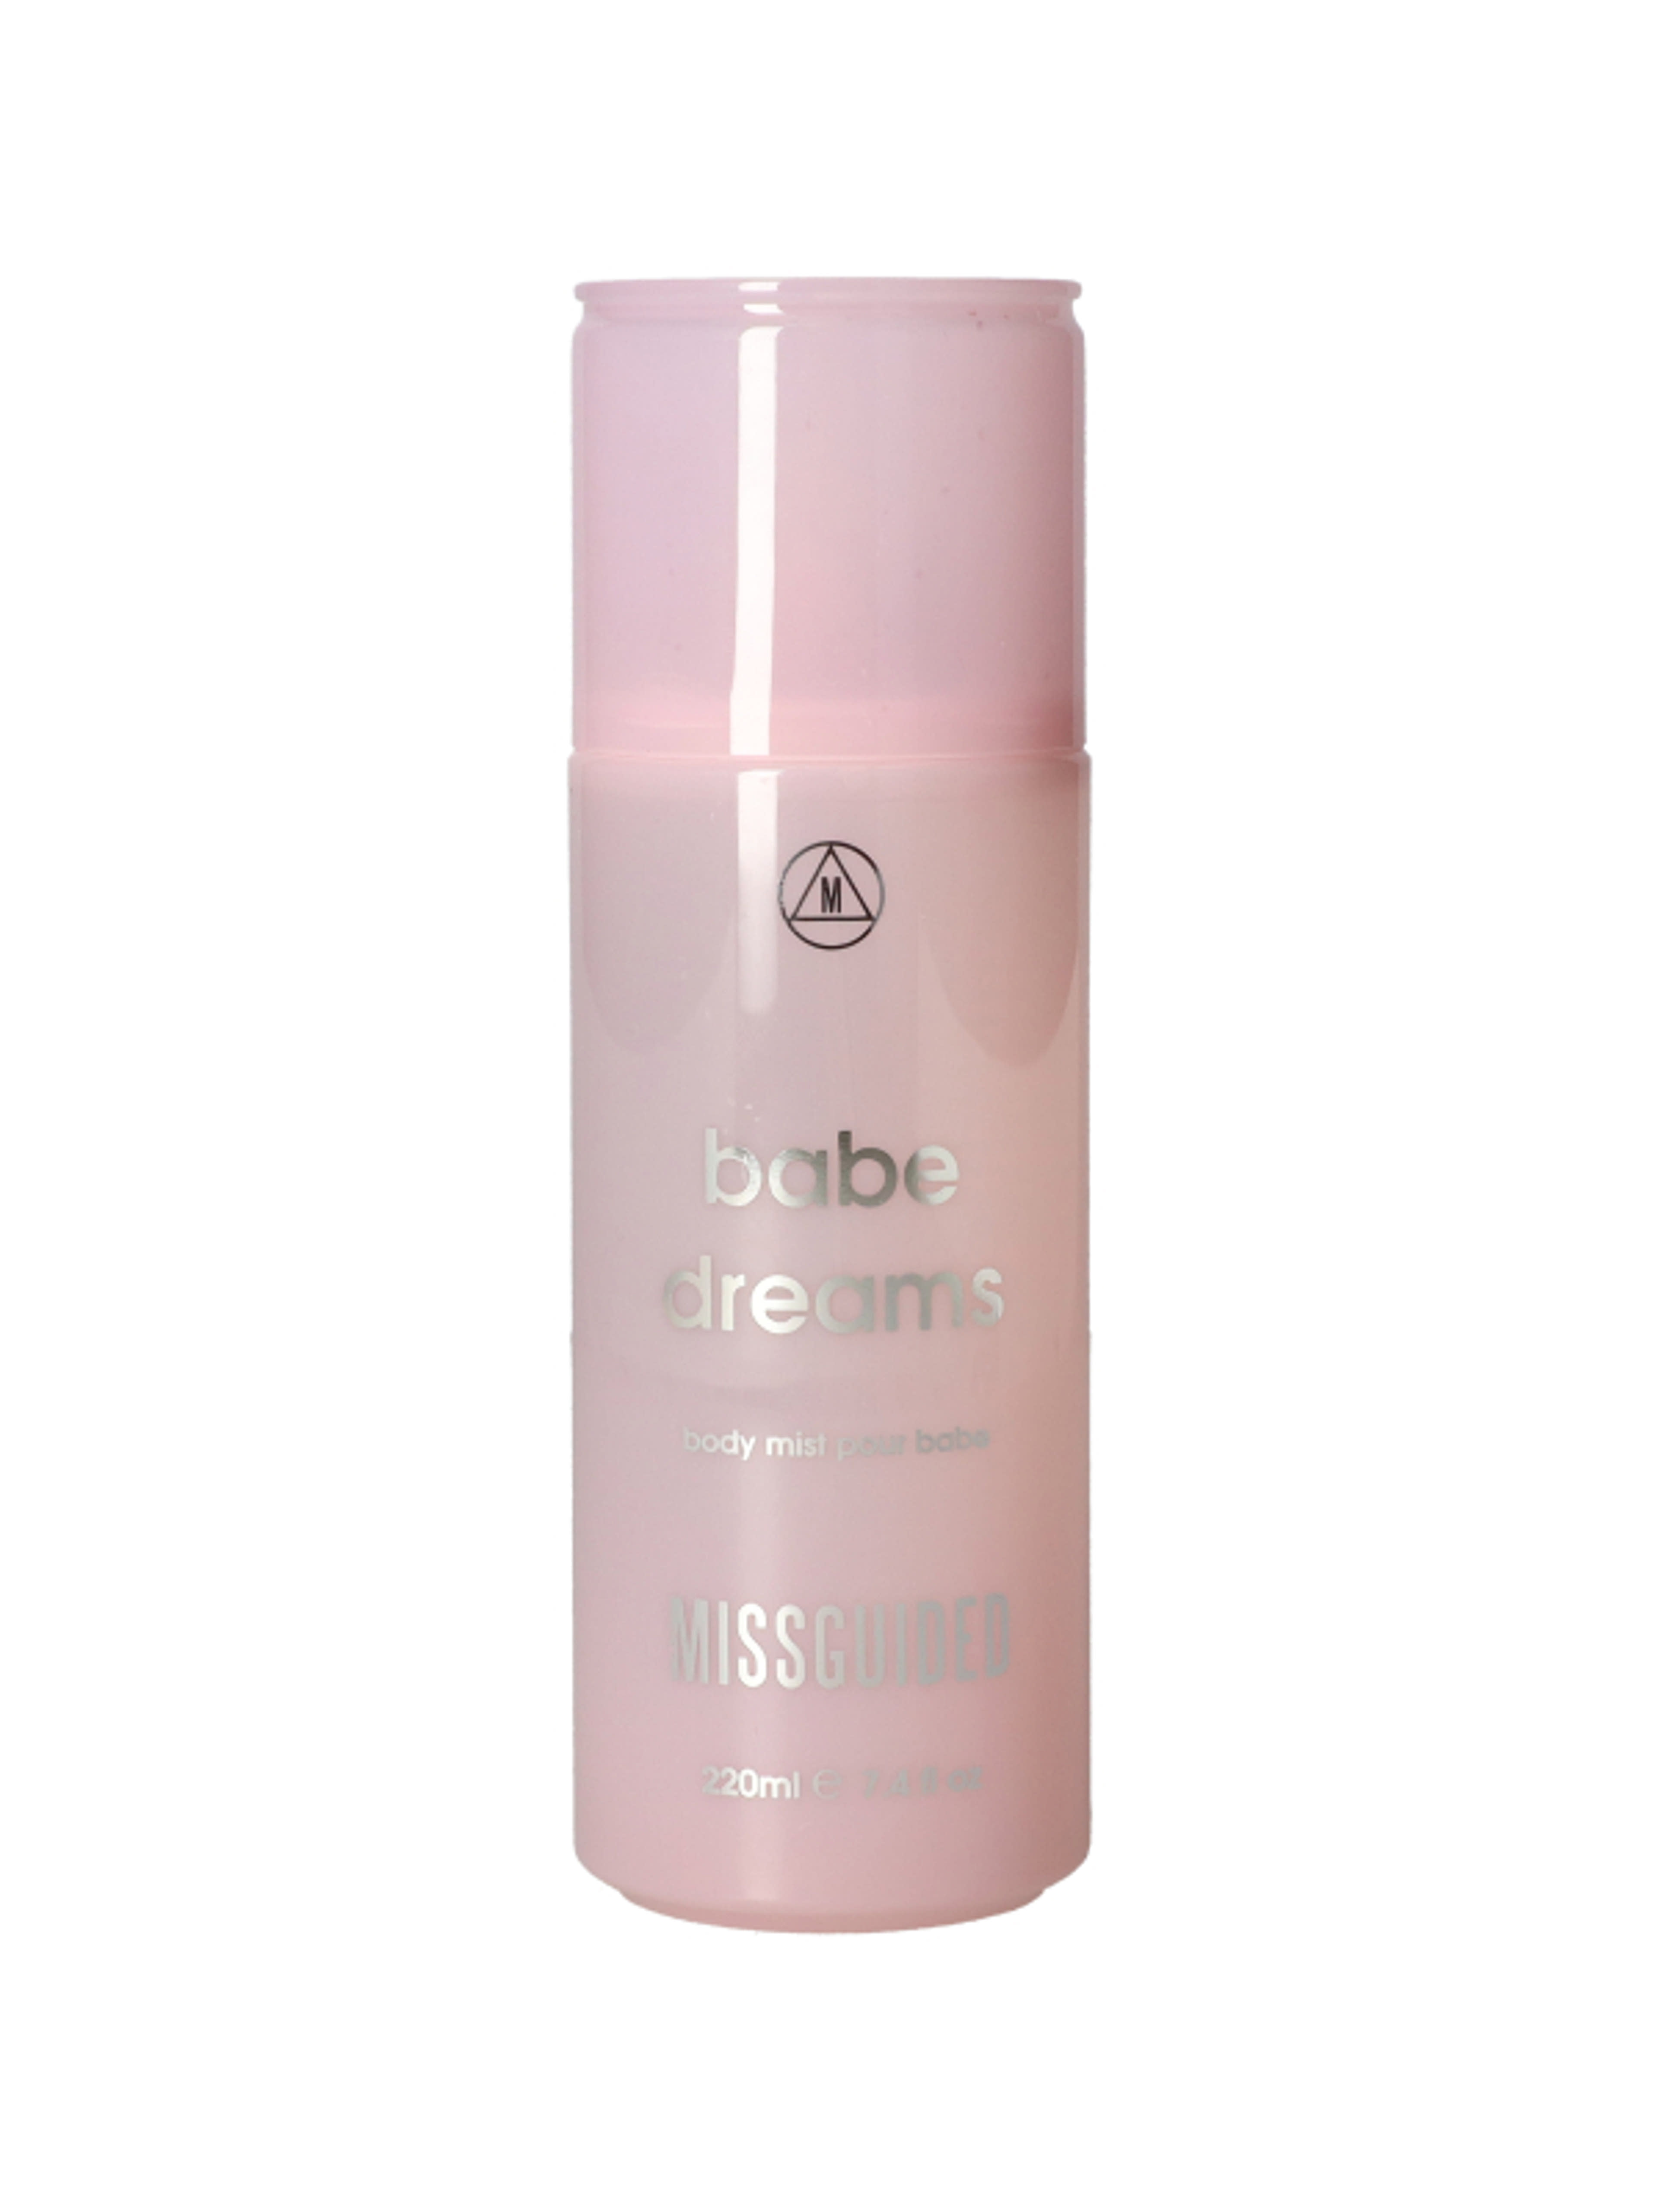 Missguided babe dreams body mist 220 ml